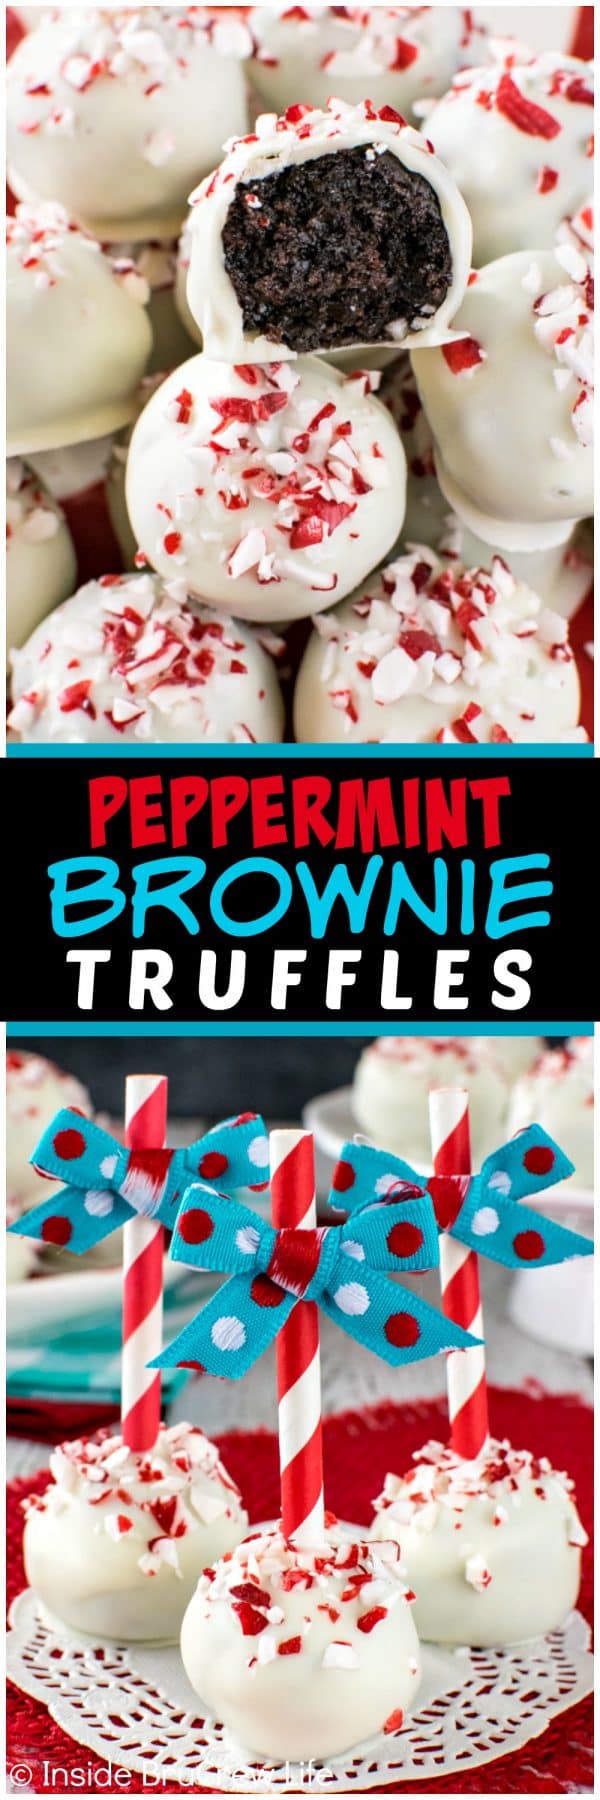 Peppermint Brownie Truffles - white chocolate & peppermint bits add a fun flair to these easy truffles. Great recipe for holiday parties!